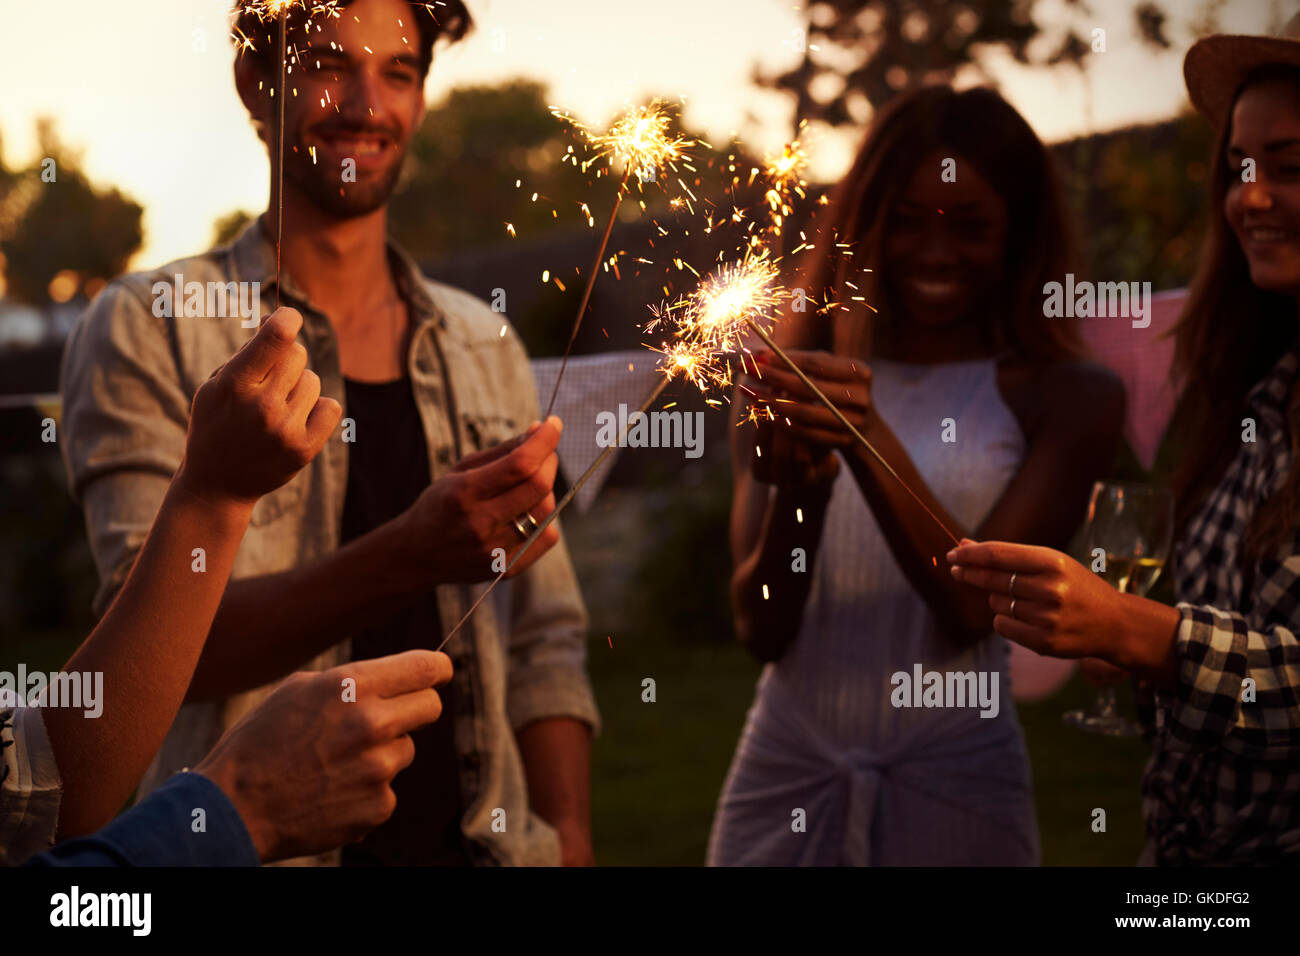 Group Of Friends With Sparklers Enjoying Outdoor Party Stock Photo